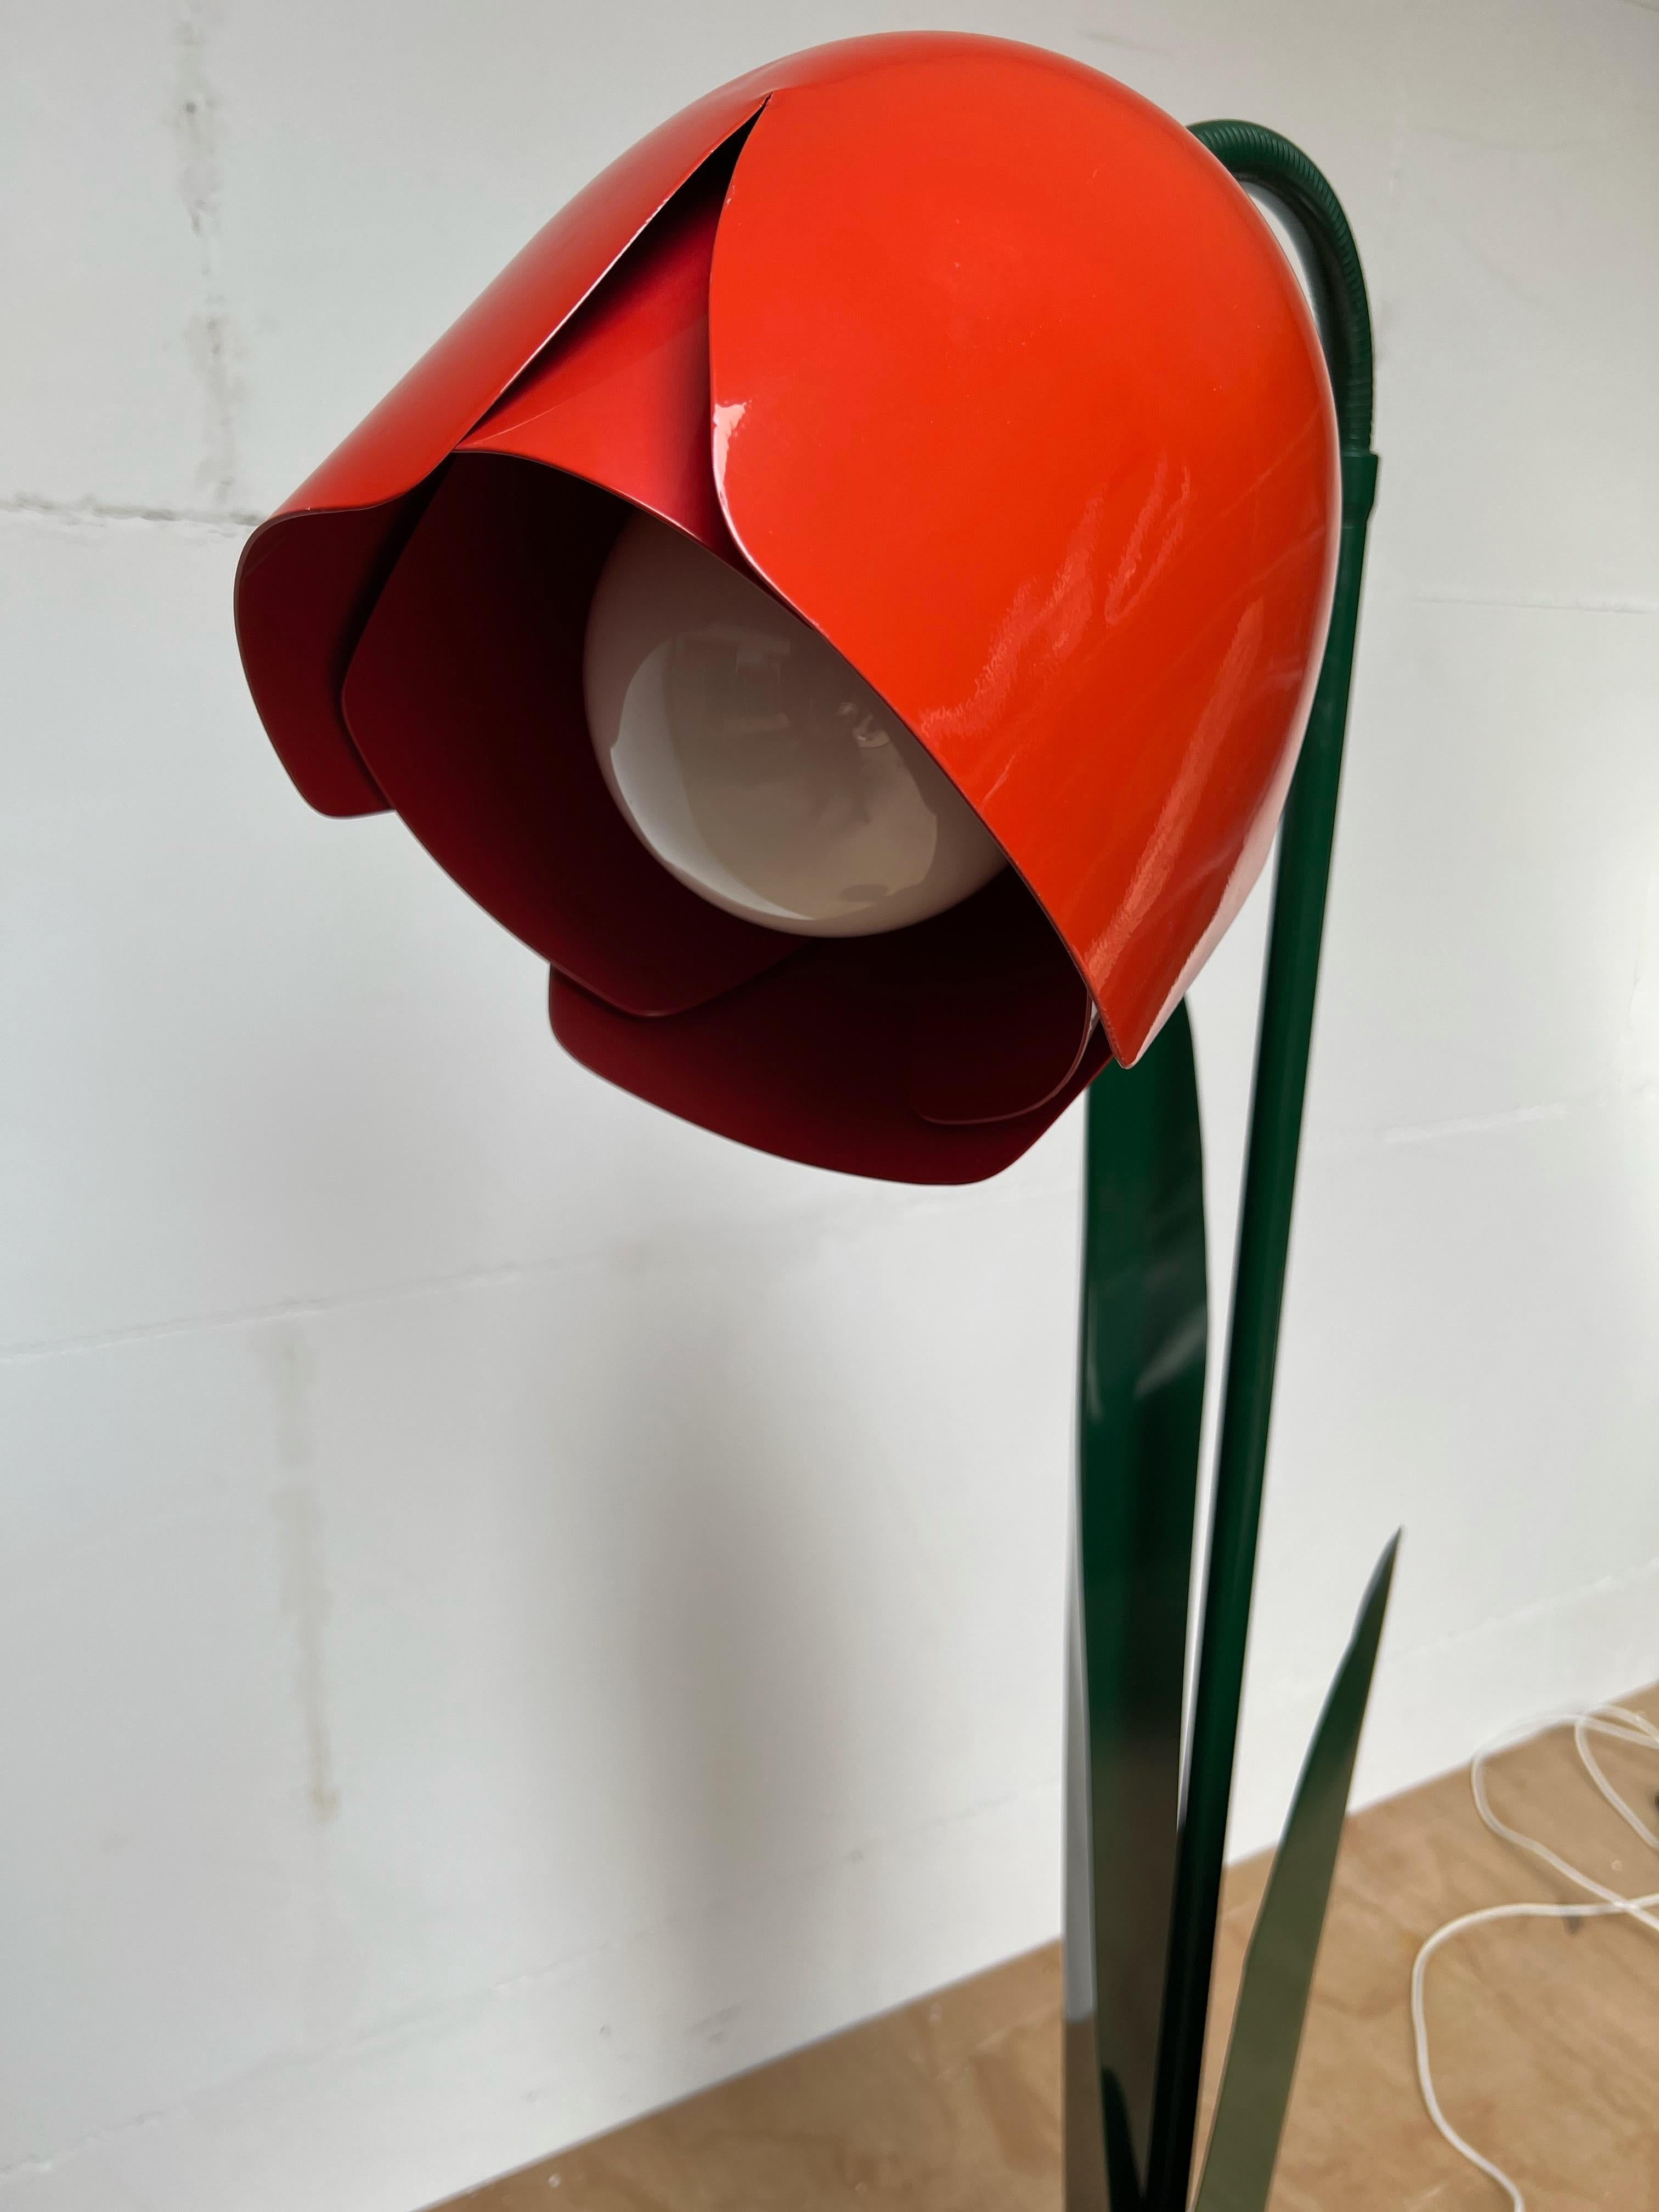 Very cool British Pop Art floor lamp.

For the collectors and enthousiasts of pop art, we are offering this very rare and stylized tulip design floor lamp. It is entirely made of painted metal and the colors make it extra vibrant and modern. The